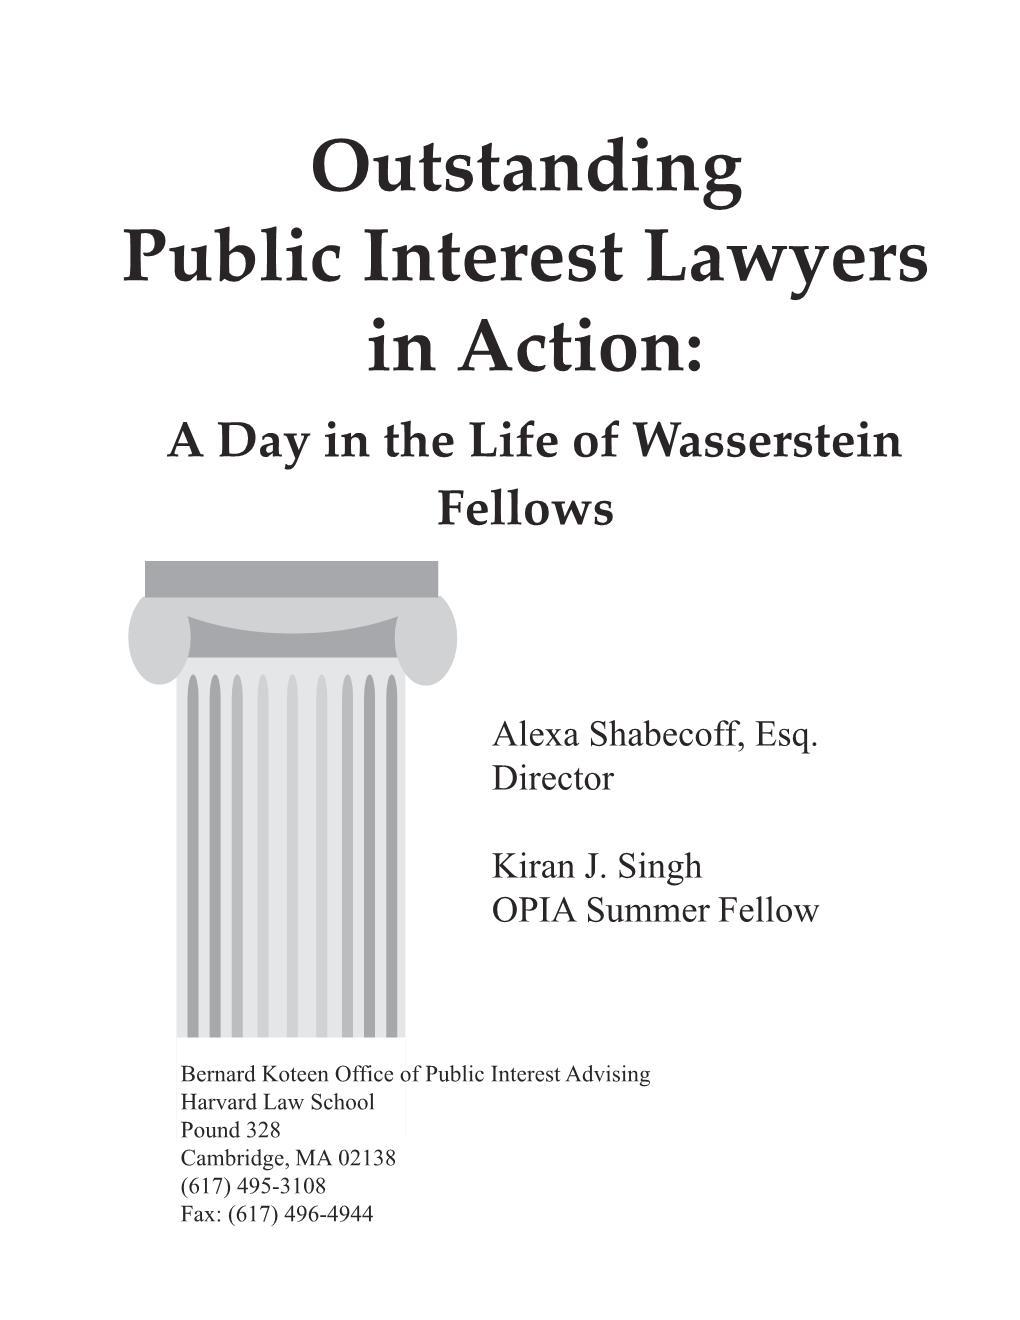 Outstanding Public Interest Lawyers in Action (.Pdf)